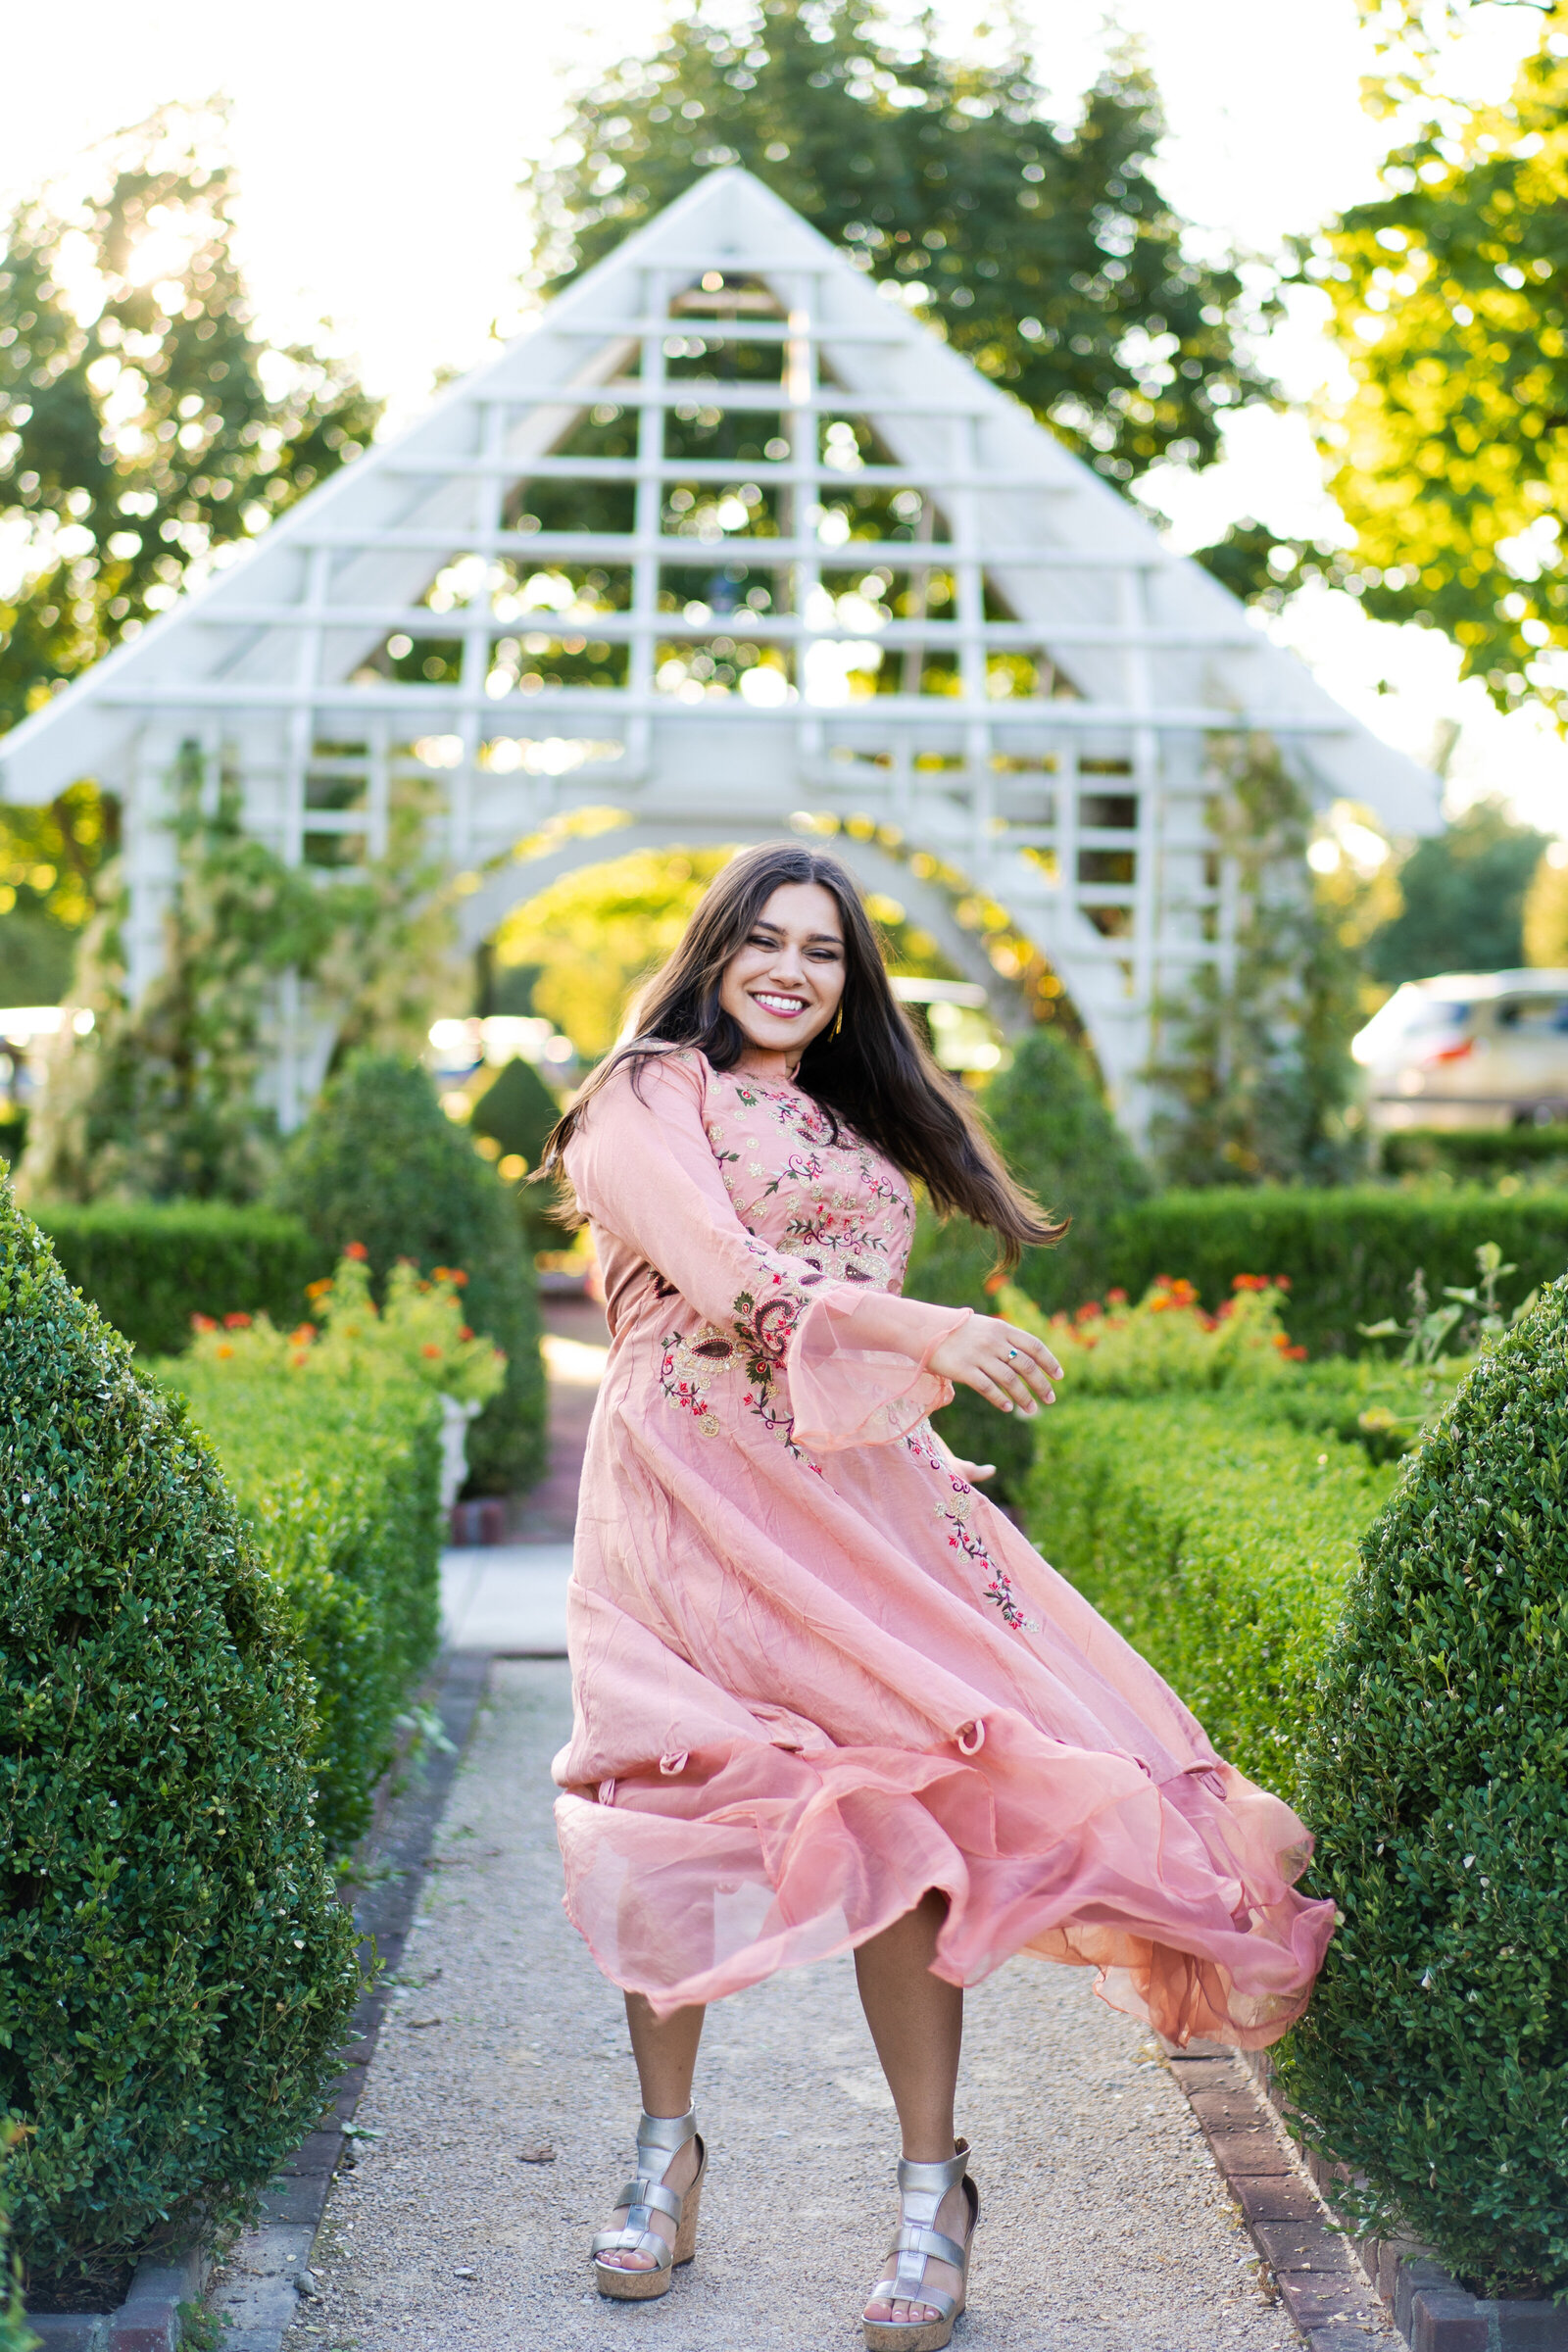 Monica, a beautiful Indian woman, tosses her dress down and laughs at the Franklin Park Conservatory in Columbus, Ohio.